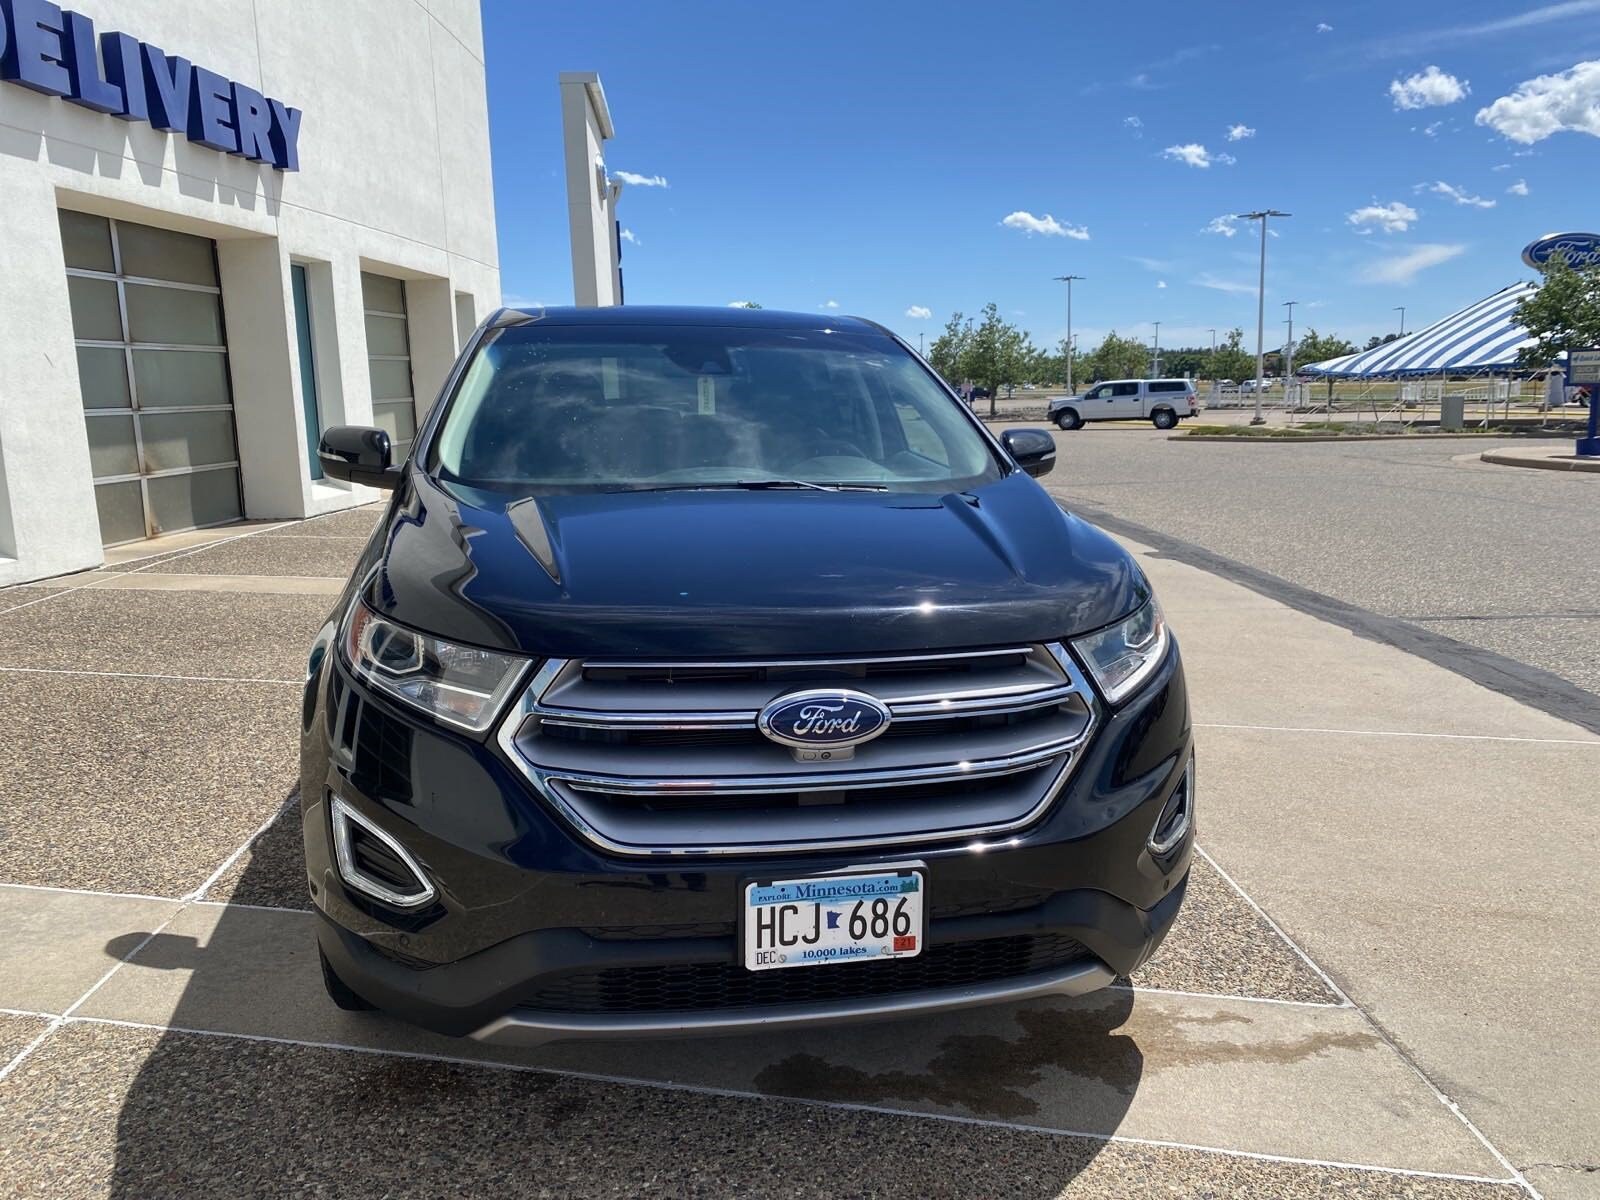 Used 2016 Ford Edge Titanium with VIN 2FMPK4K9XGBC16860 for sale in Baxter, Minnesota